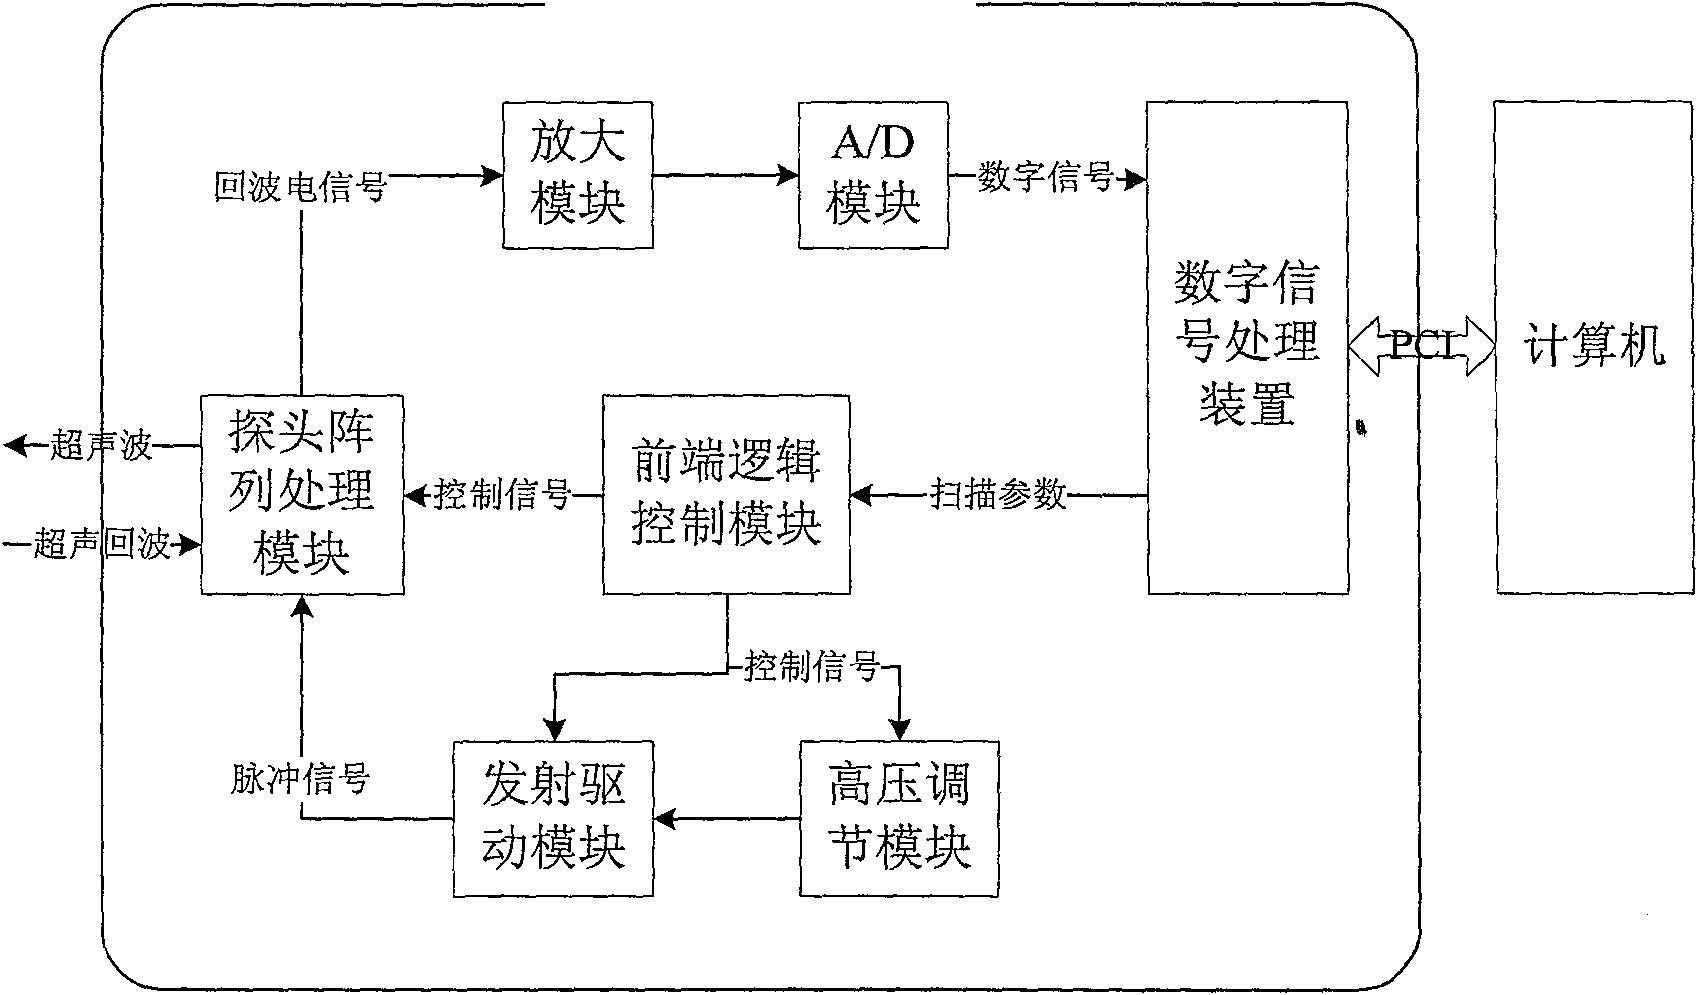 Digital family planing ultrasound system and data acquisition method